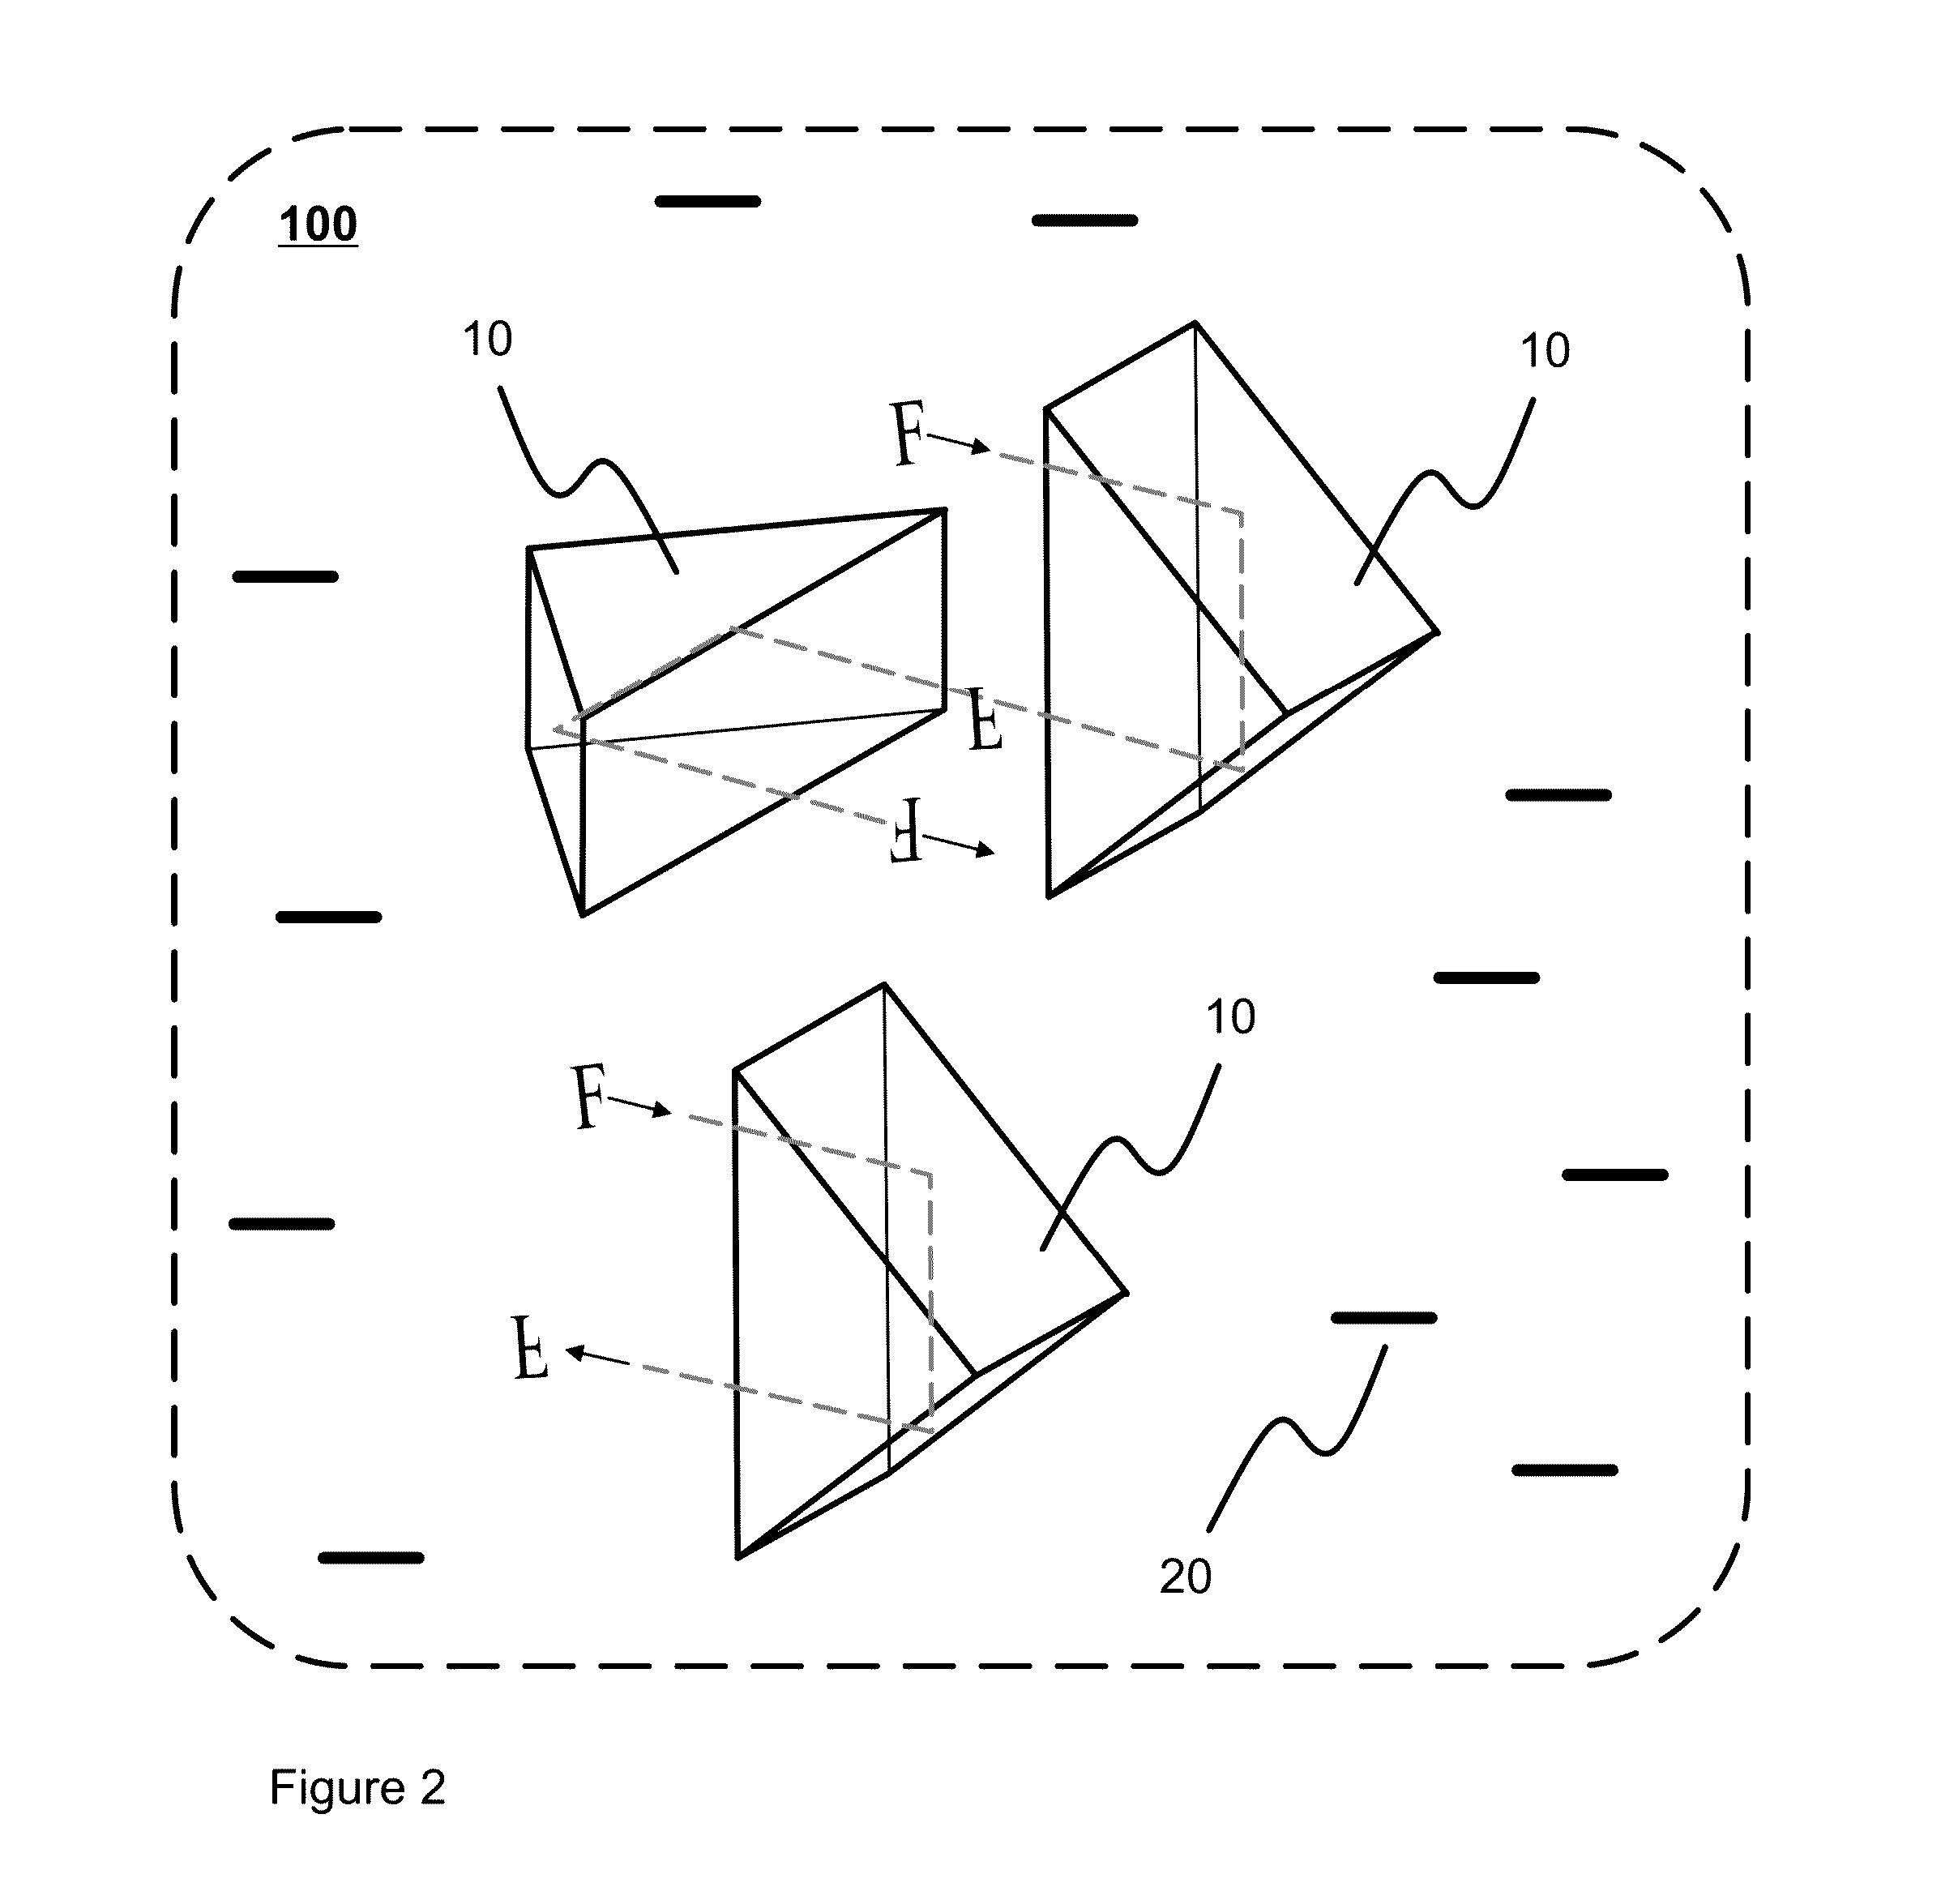 Retroreflective biodegradable element, composite and related products